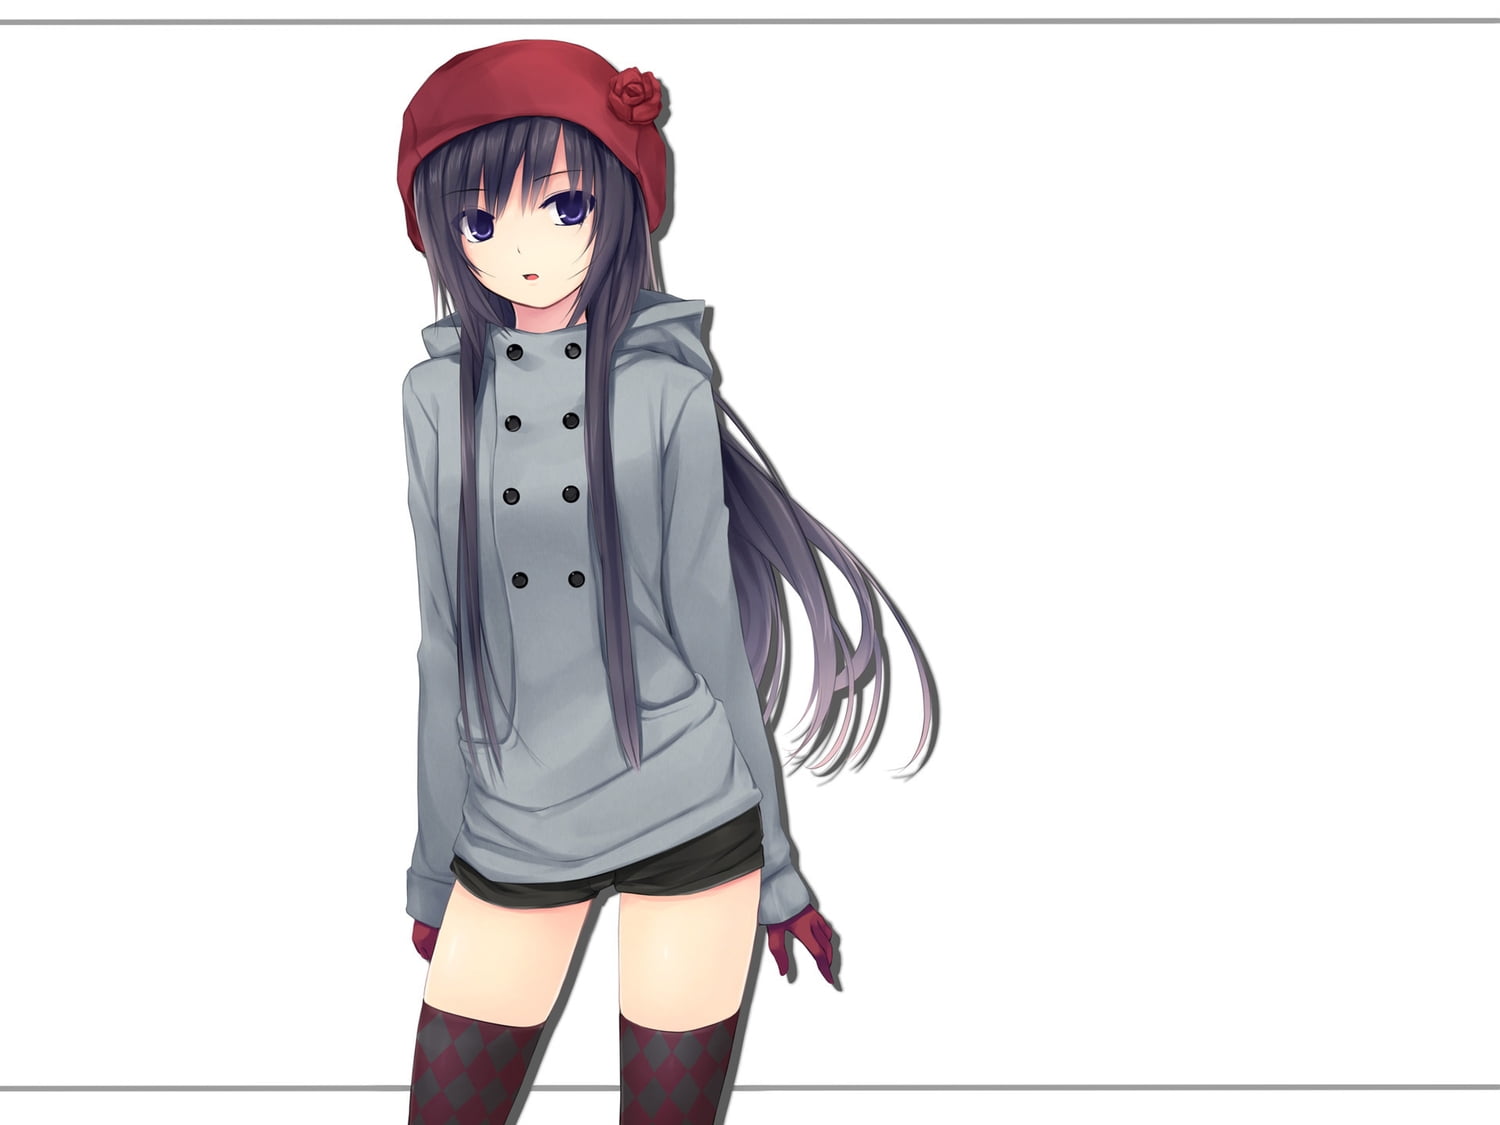 Anime Character With Gray Double Breasted Hoodie And Red Knit Cap